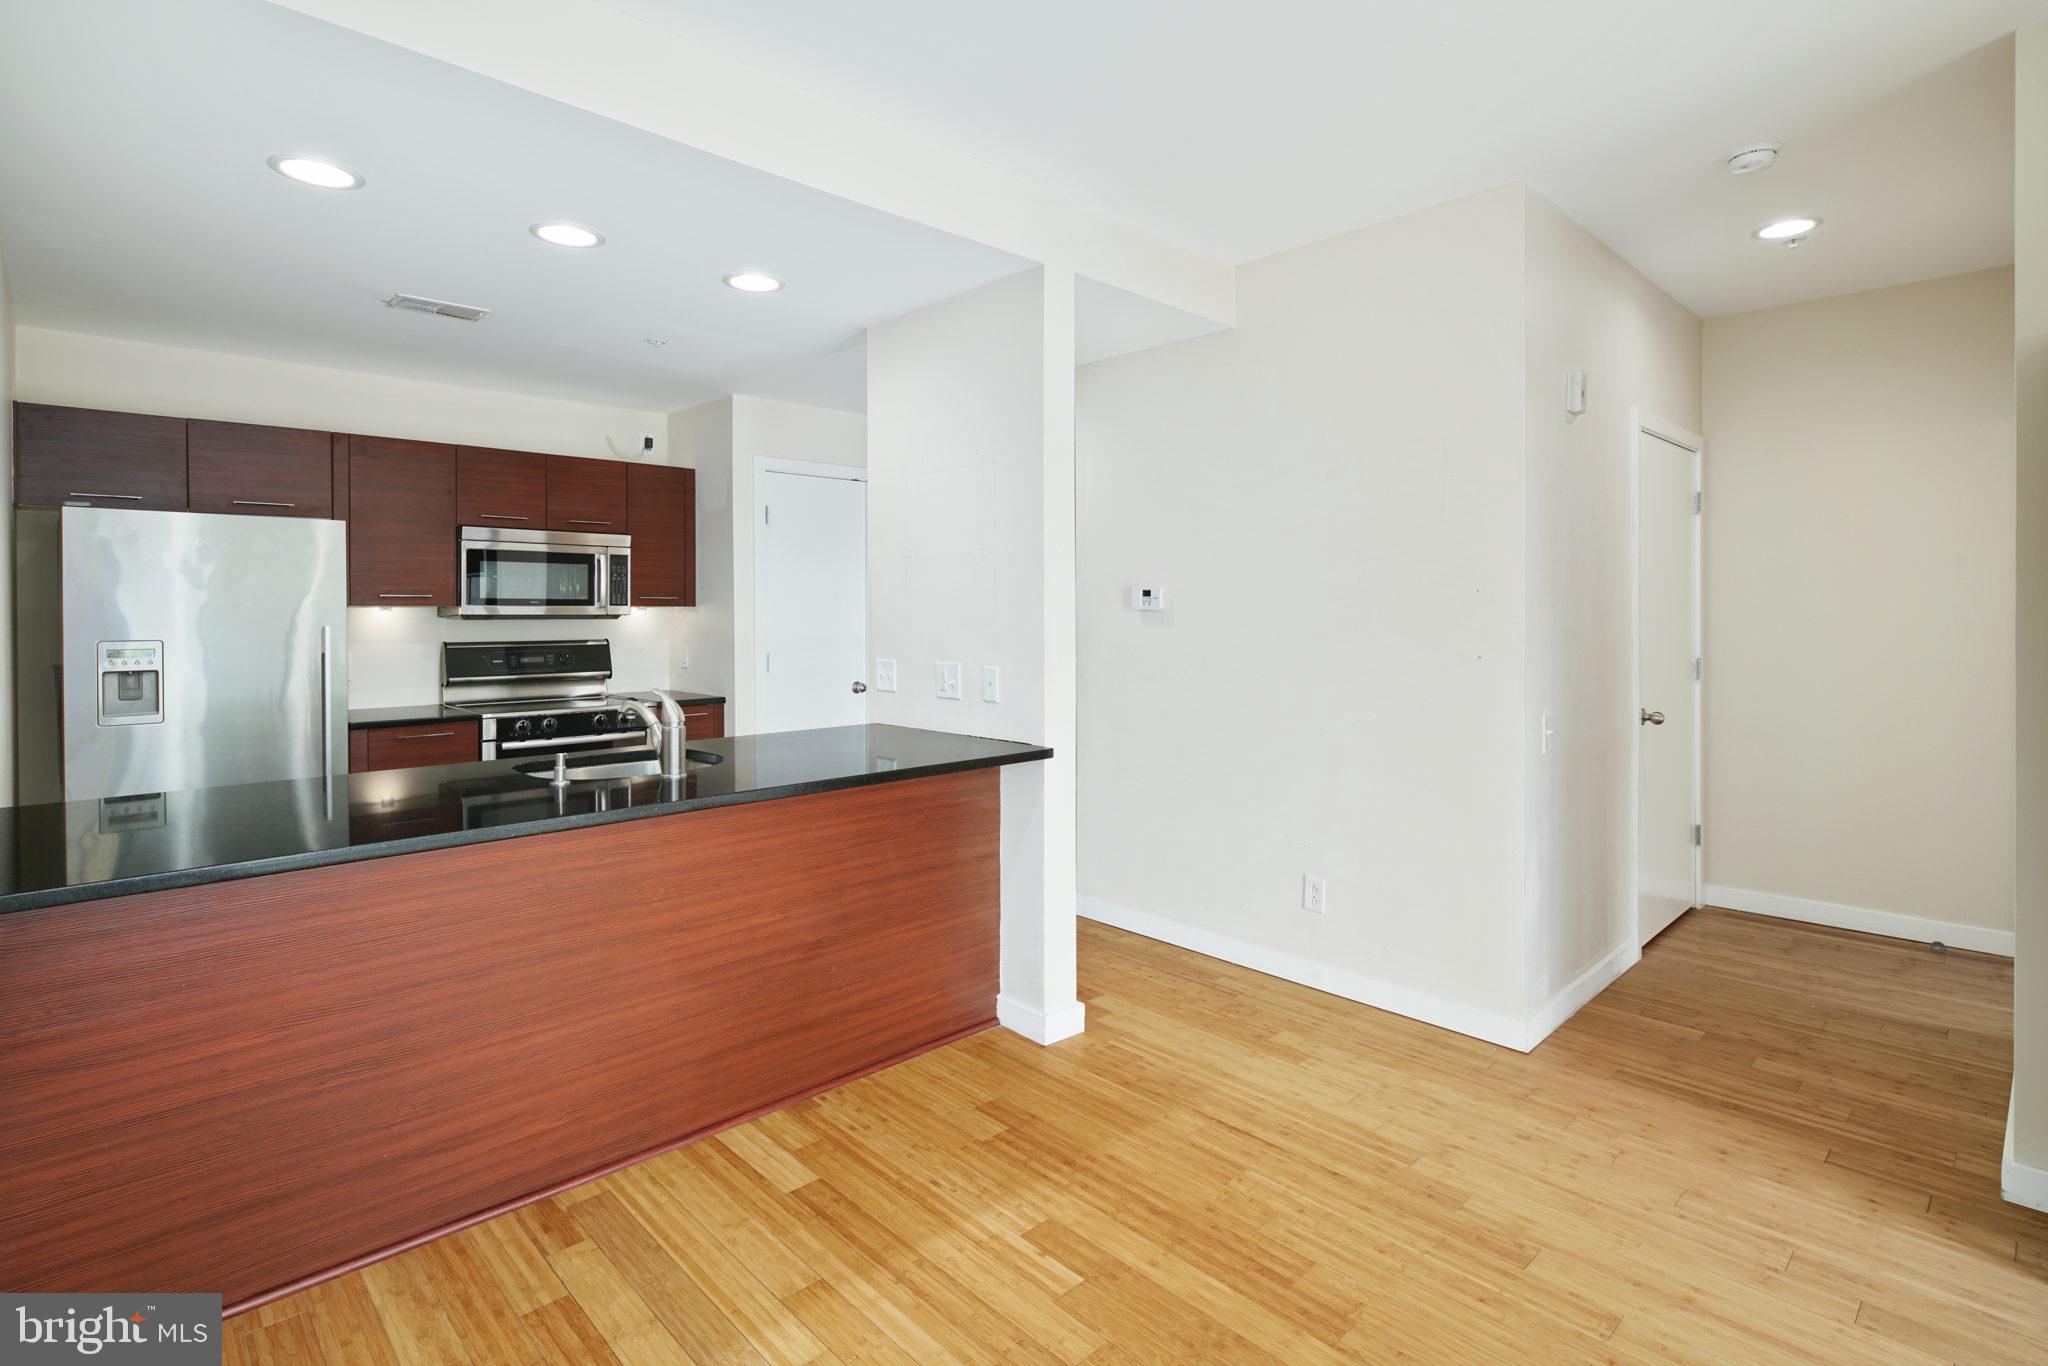 a large kitchen with stainless steel appliances wooden floor and a refrigerator